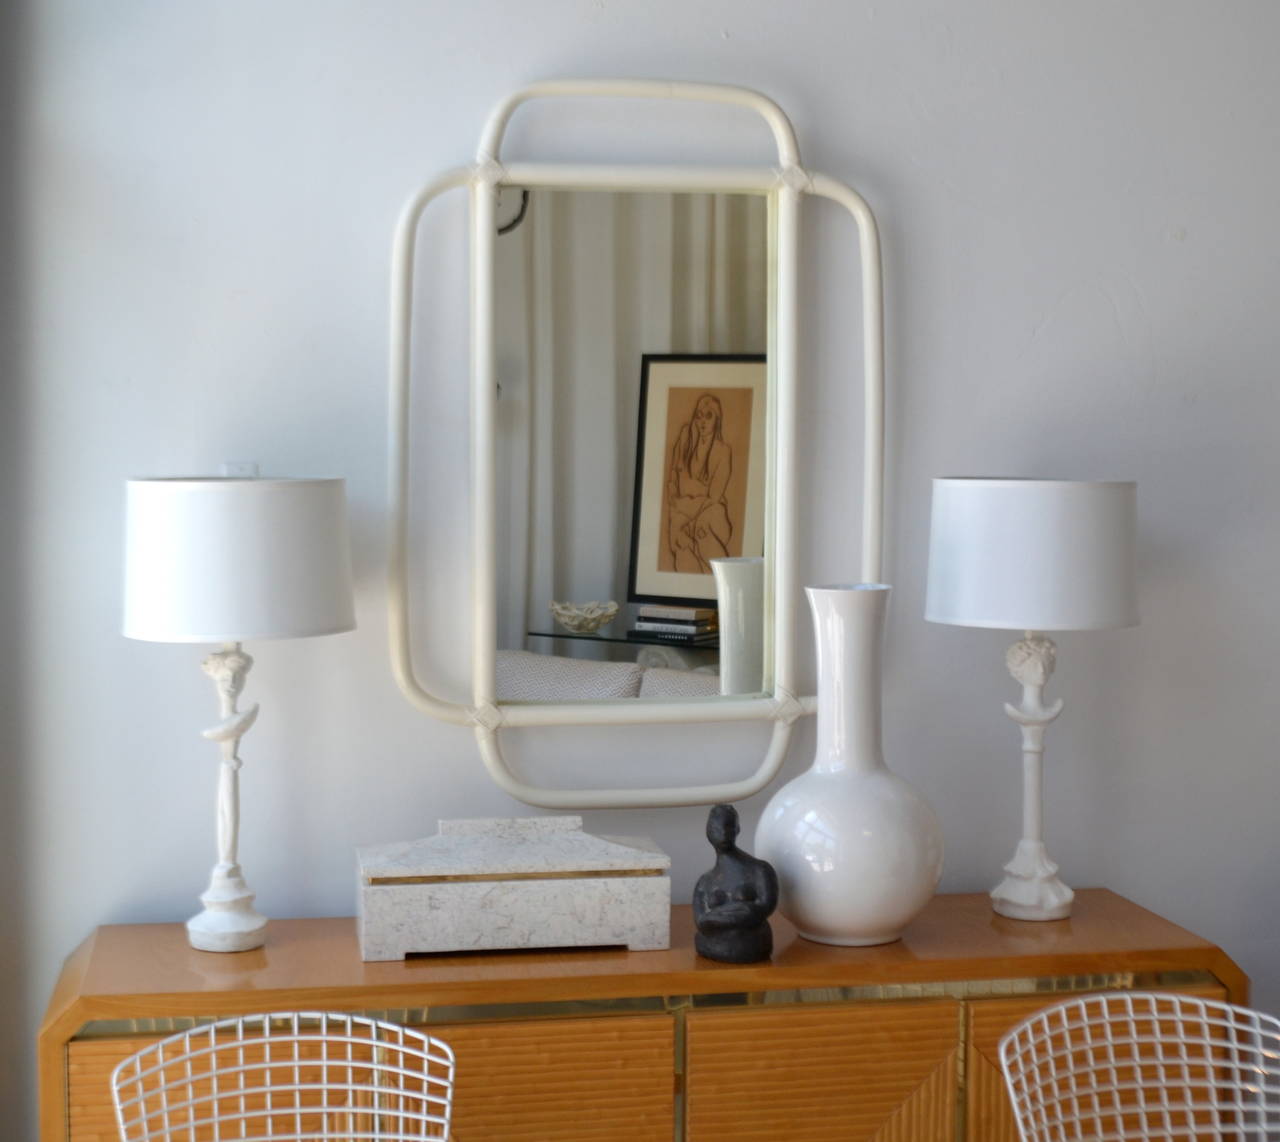 Striking pair of Mid-Century white painted plaster figural table lamps after Alberto and Diego Giacometti for Jean-Michel Frank in original good condition, circa 1950s-1960s. Shades not included.
Measurements:
Overall 30